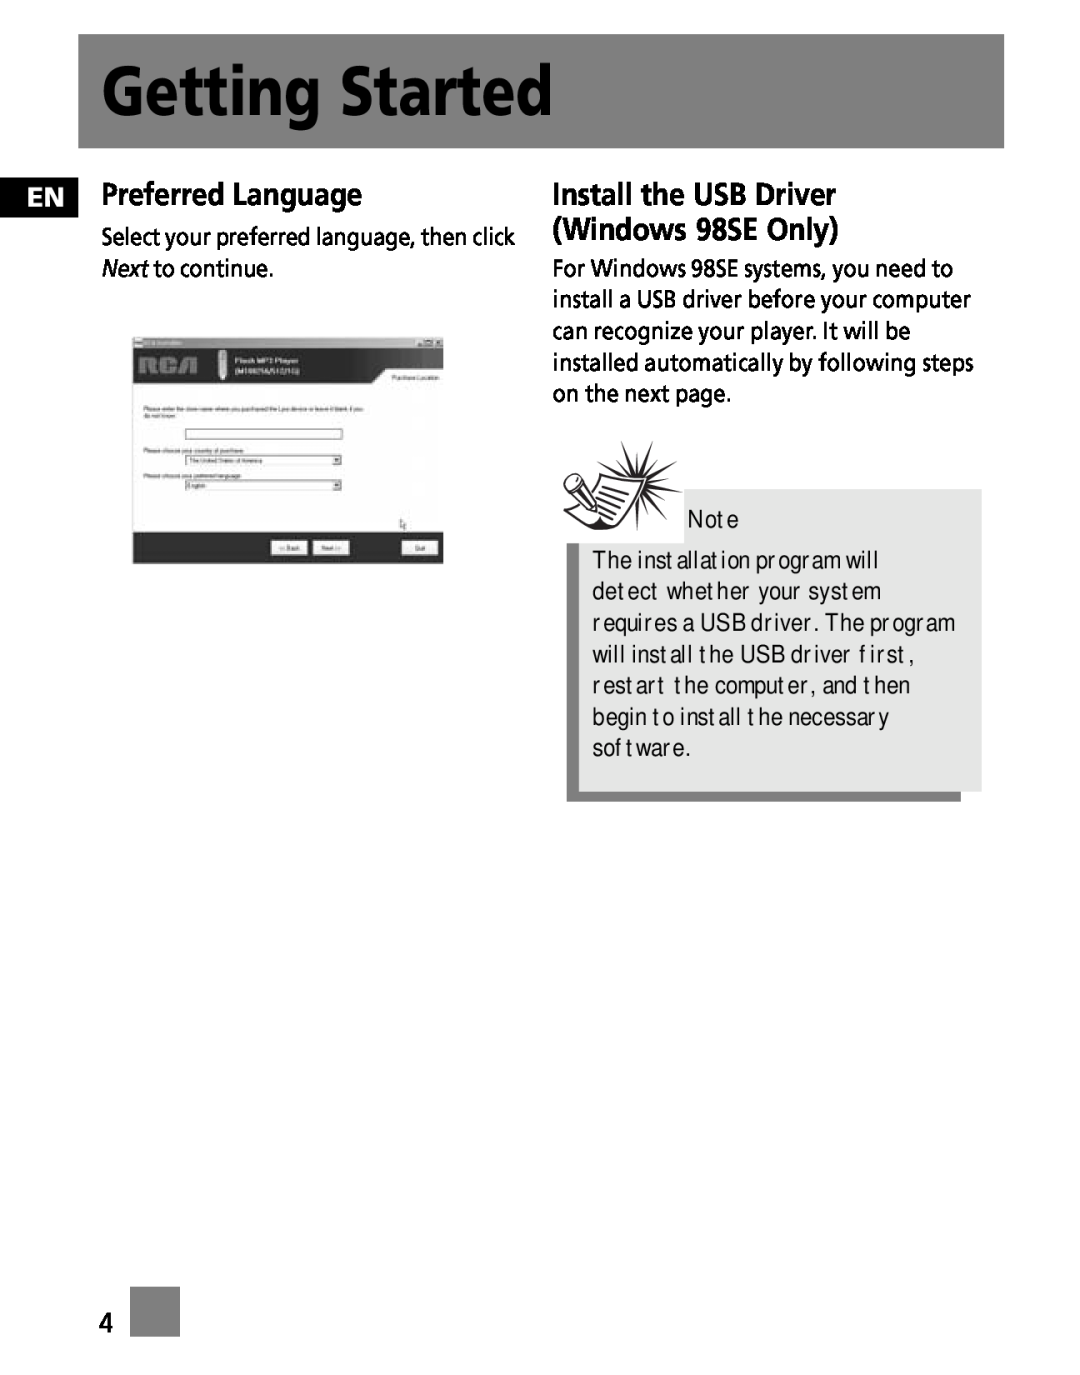 RCA M100256 user manual EN Preferred Language, Install the USB Driver Windows 98SE Only, Getting Started 